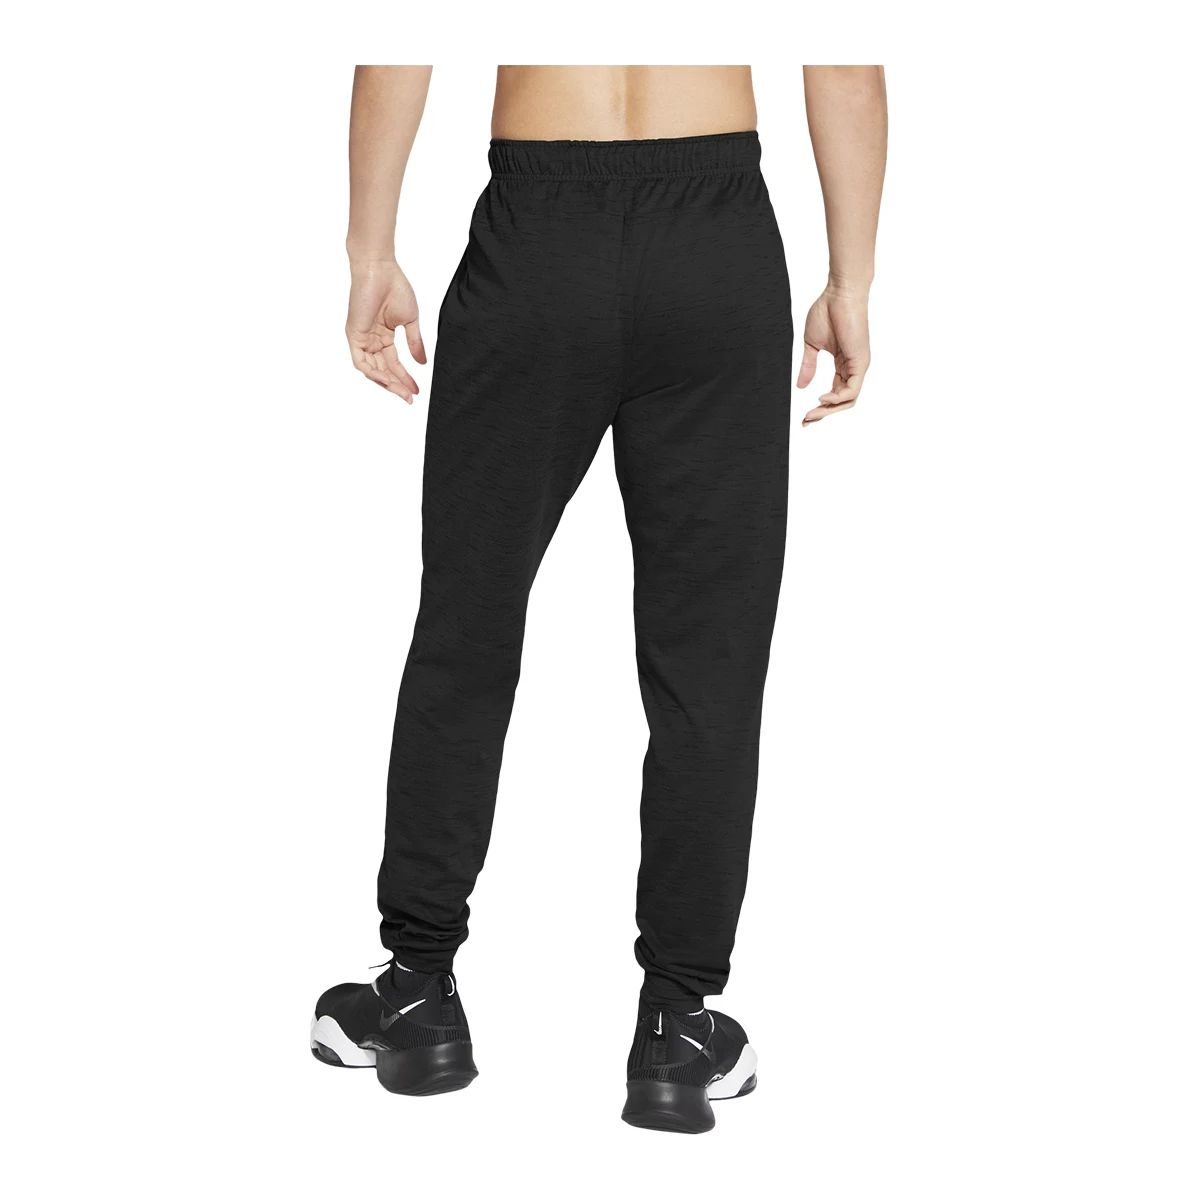 NIKE Men's Dry Fleece Training Pants, Black/White, Large Tall Tall :  : Clothing, Shoes & Accessories